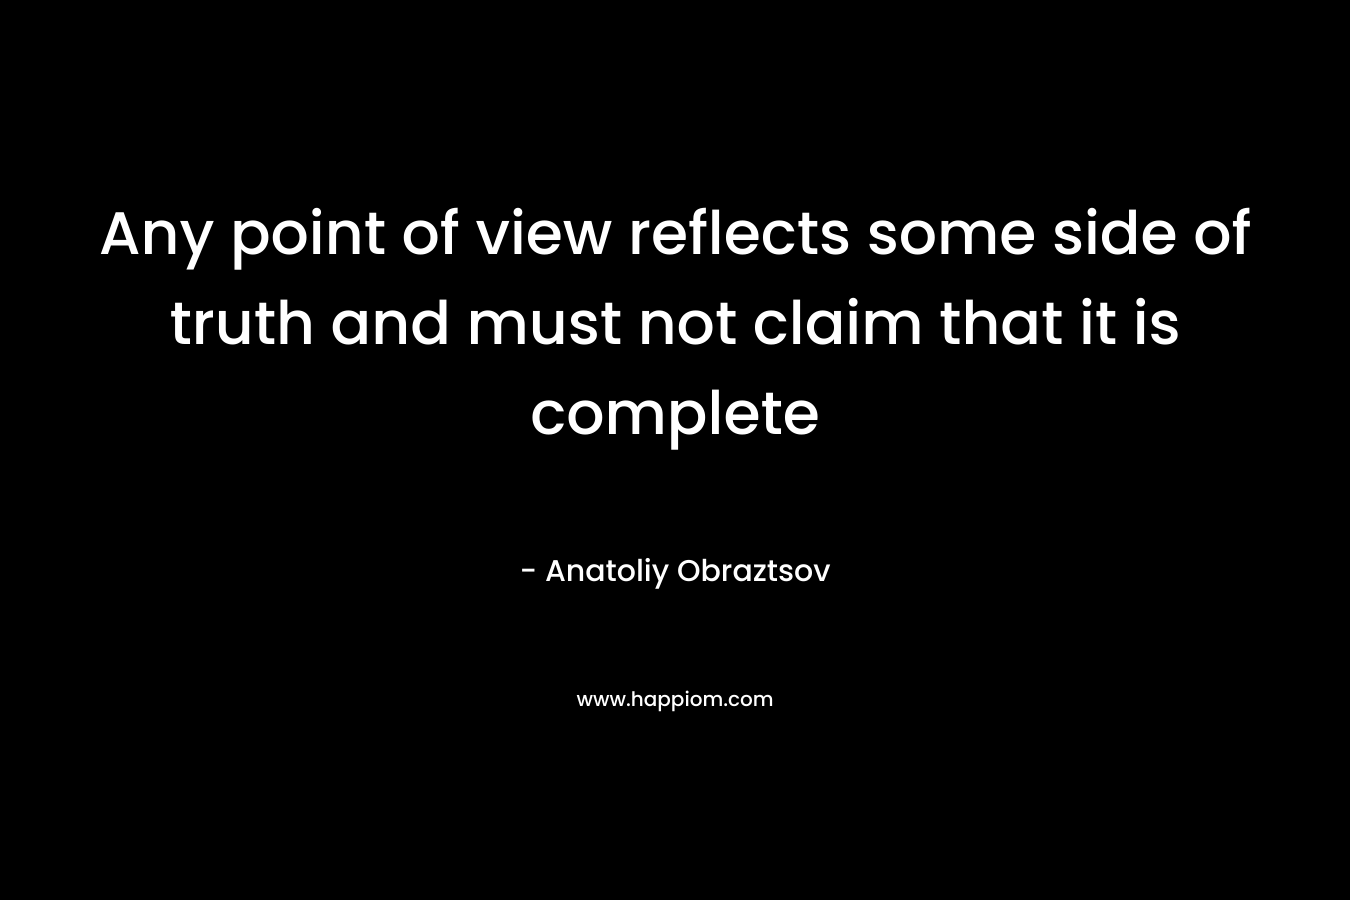 Any point of view reflects some side of truth and must not claim that it is complete